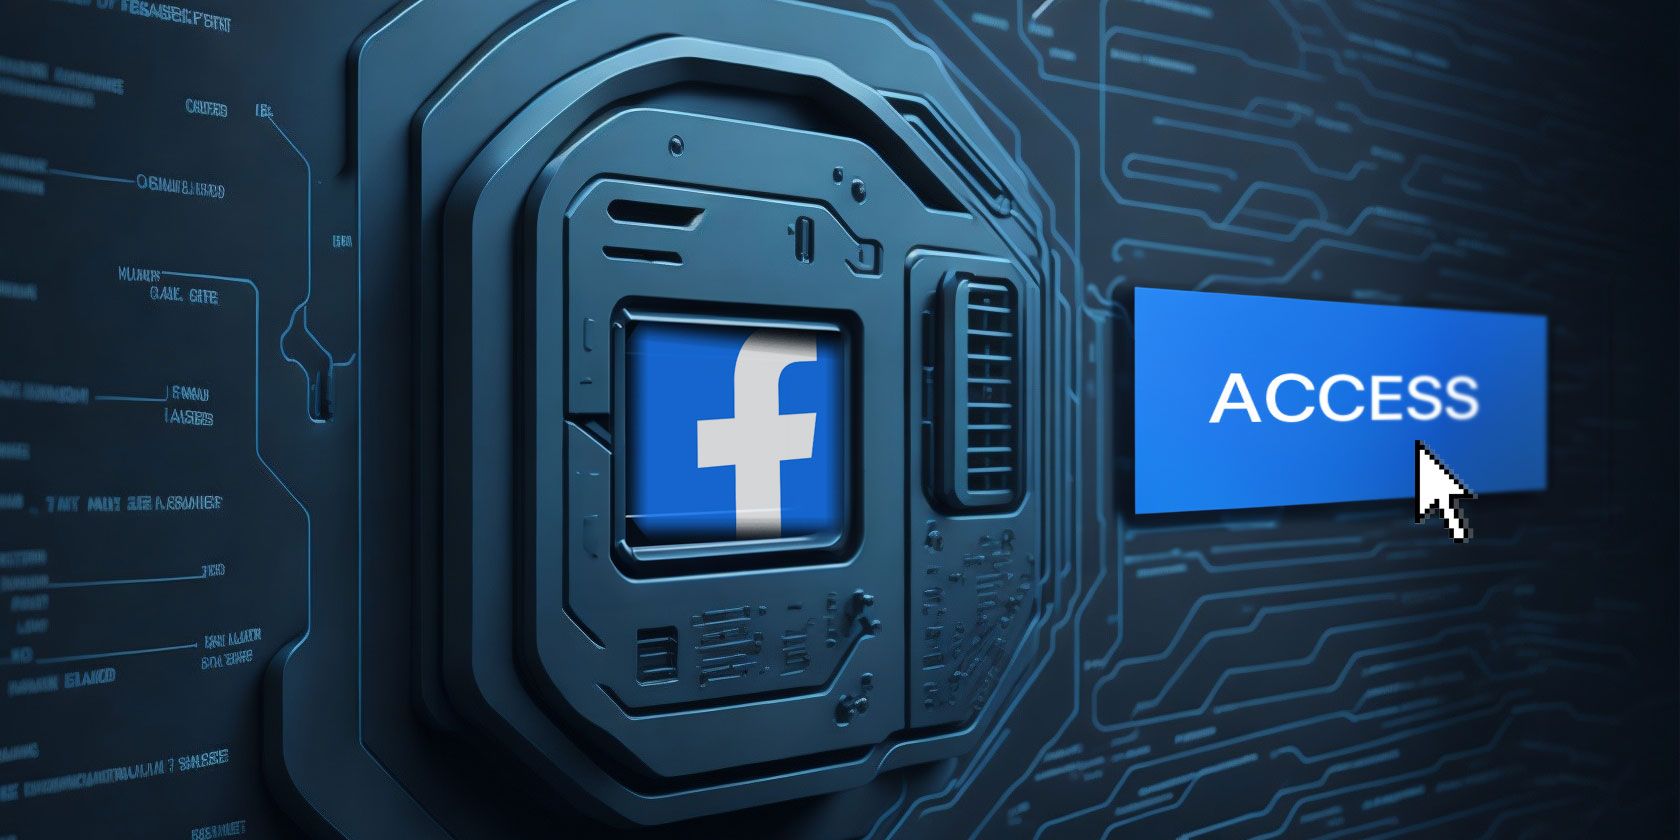 How to get a security code for logging into Facebook - Javatpoint